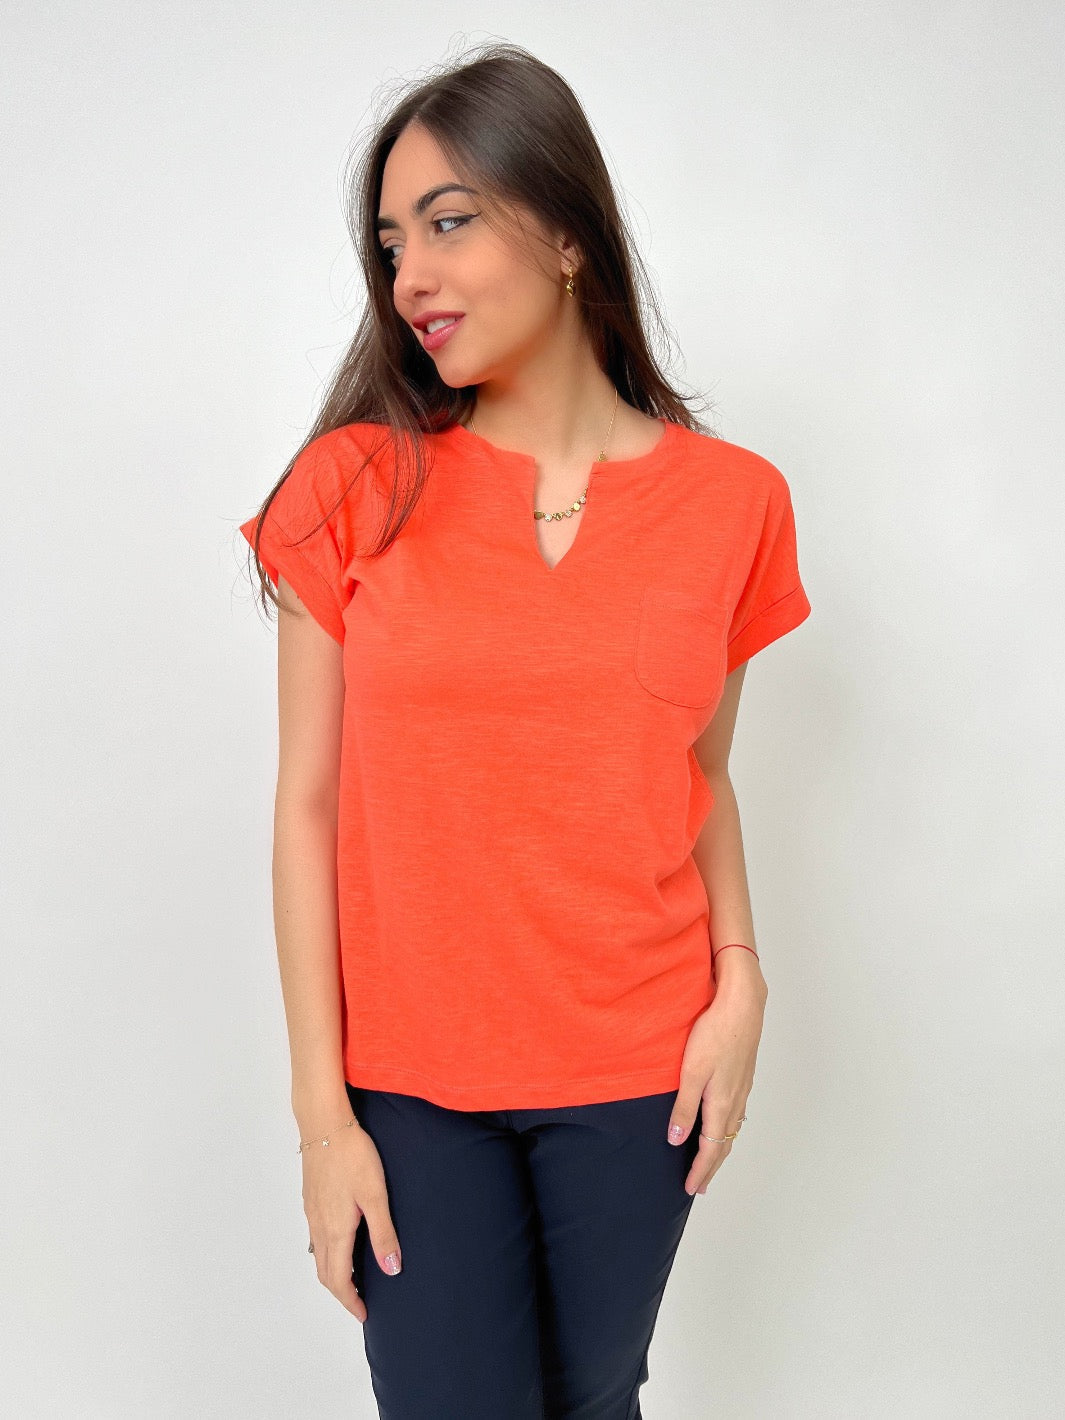 Freequent Top With Pocket In Hot Coral-Nicola Ross